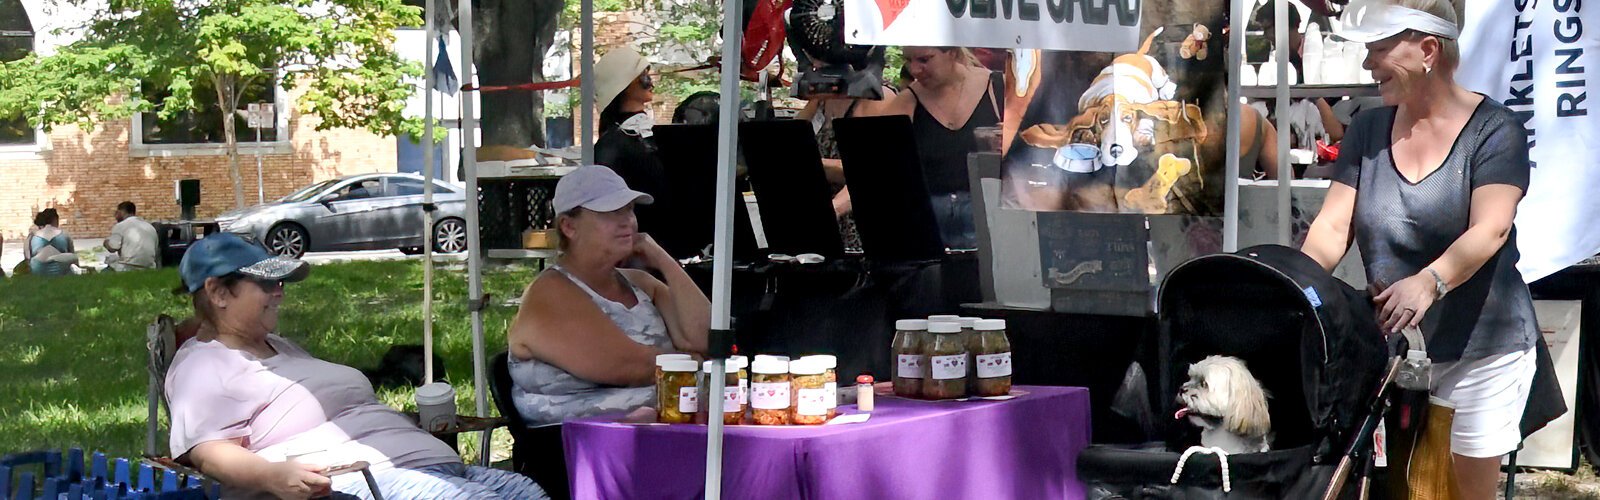 Running from October to May, with the smaller summer market running from June to August, the St Pete Saturday Morning Market is a great place to enjoy the sense of community.